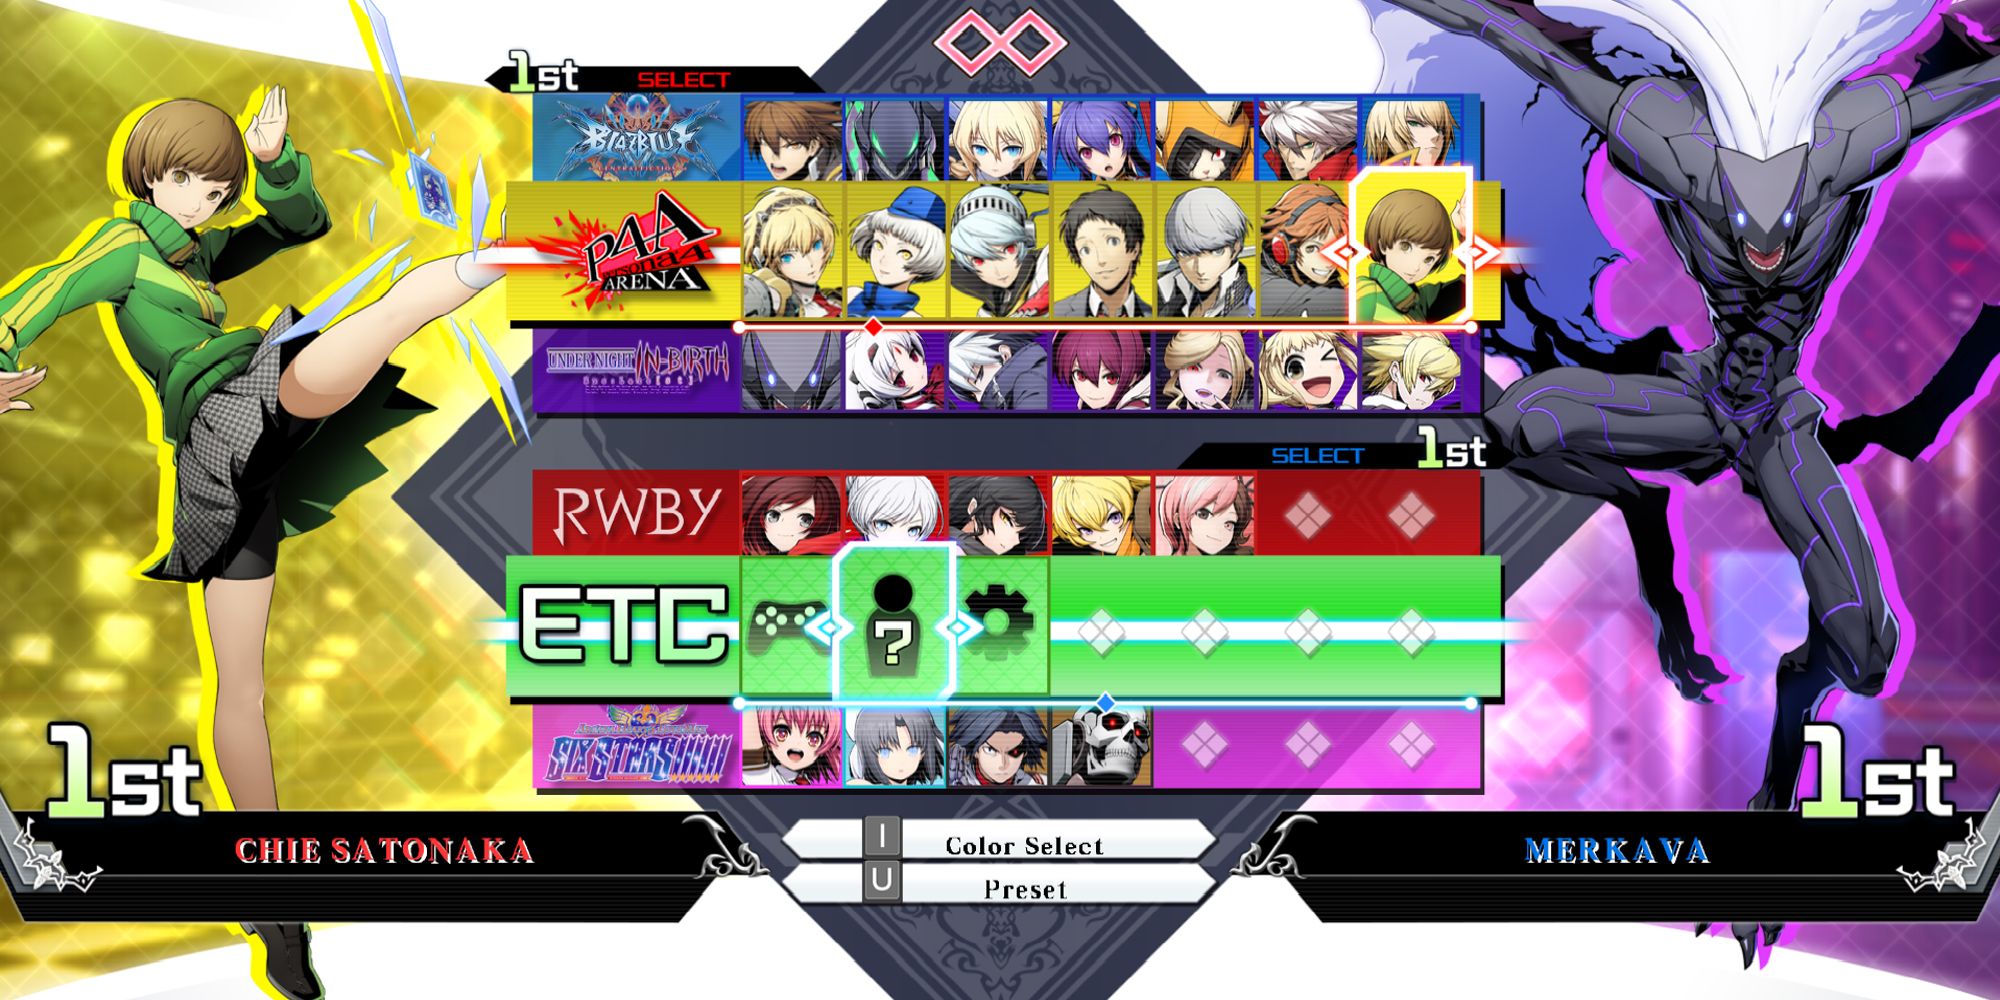 The Character Select Screen for BlazBlue: Cross Tag Battle